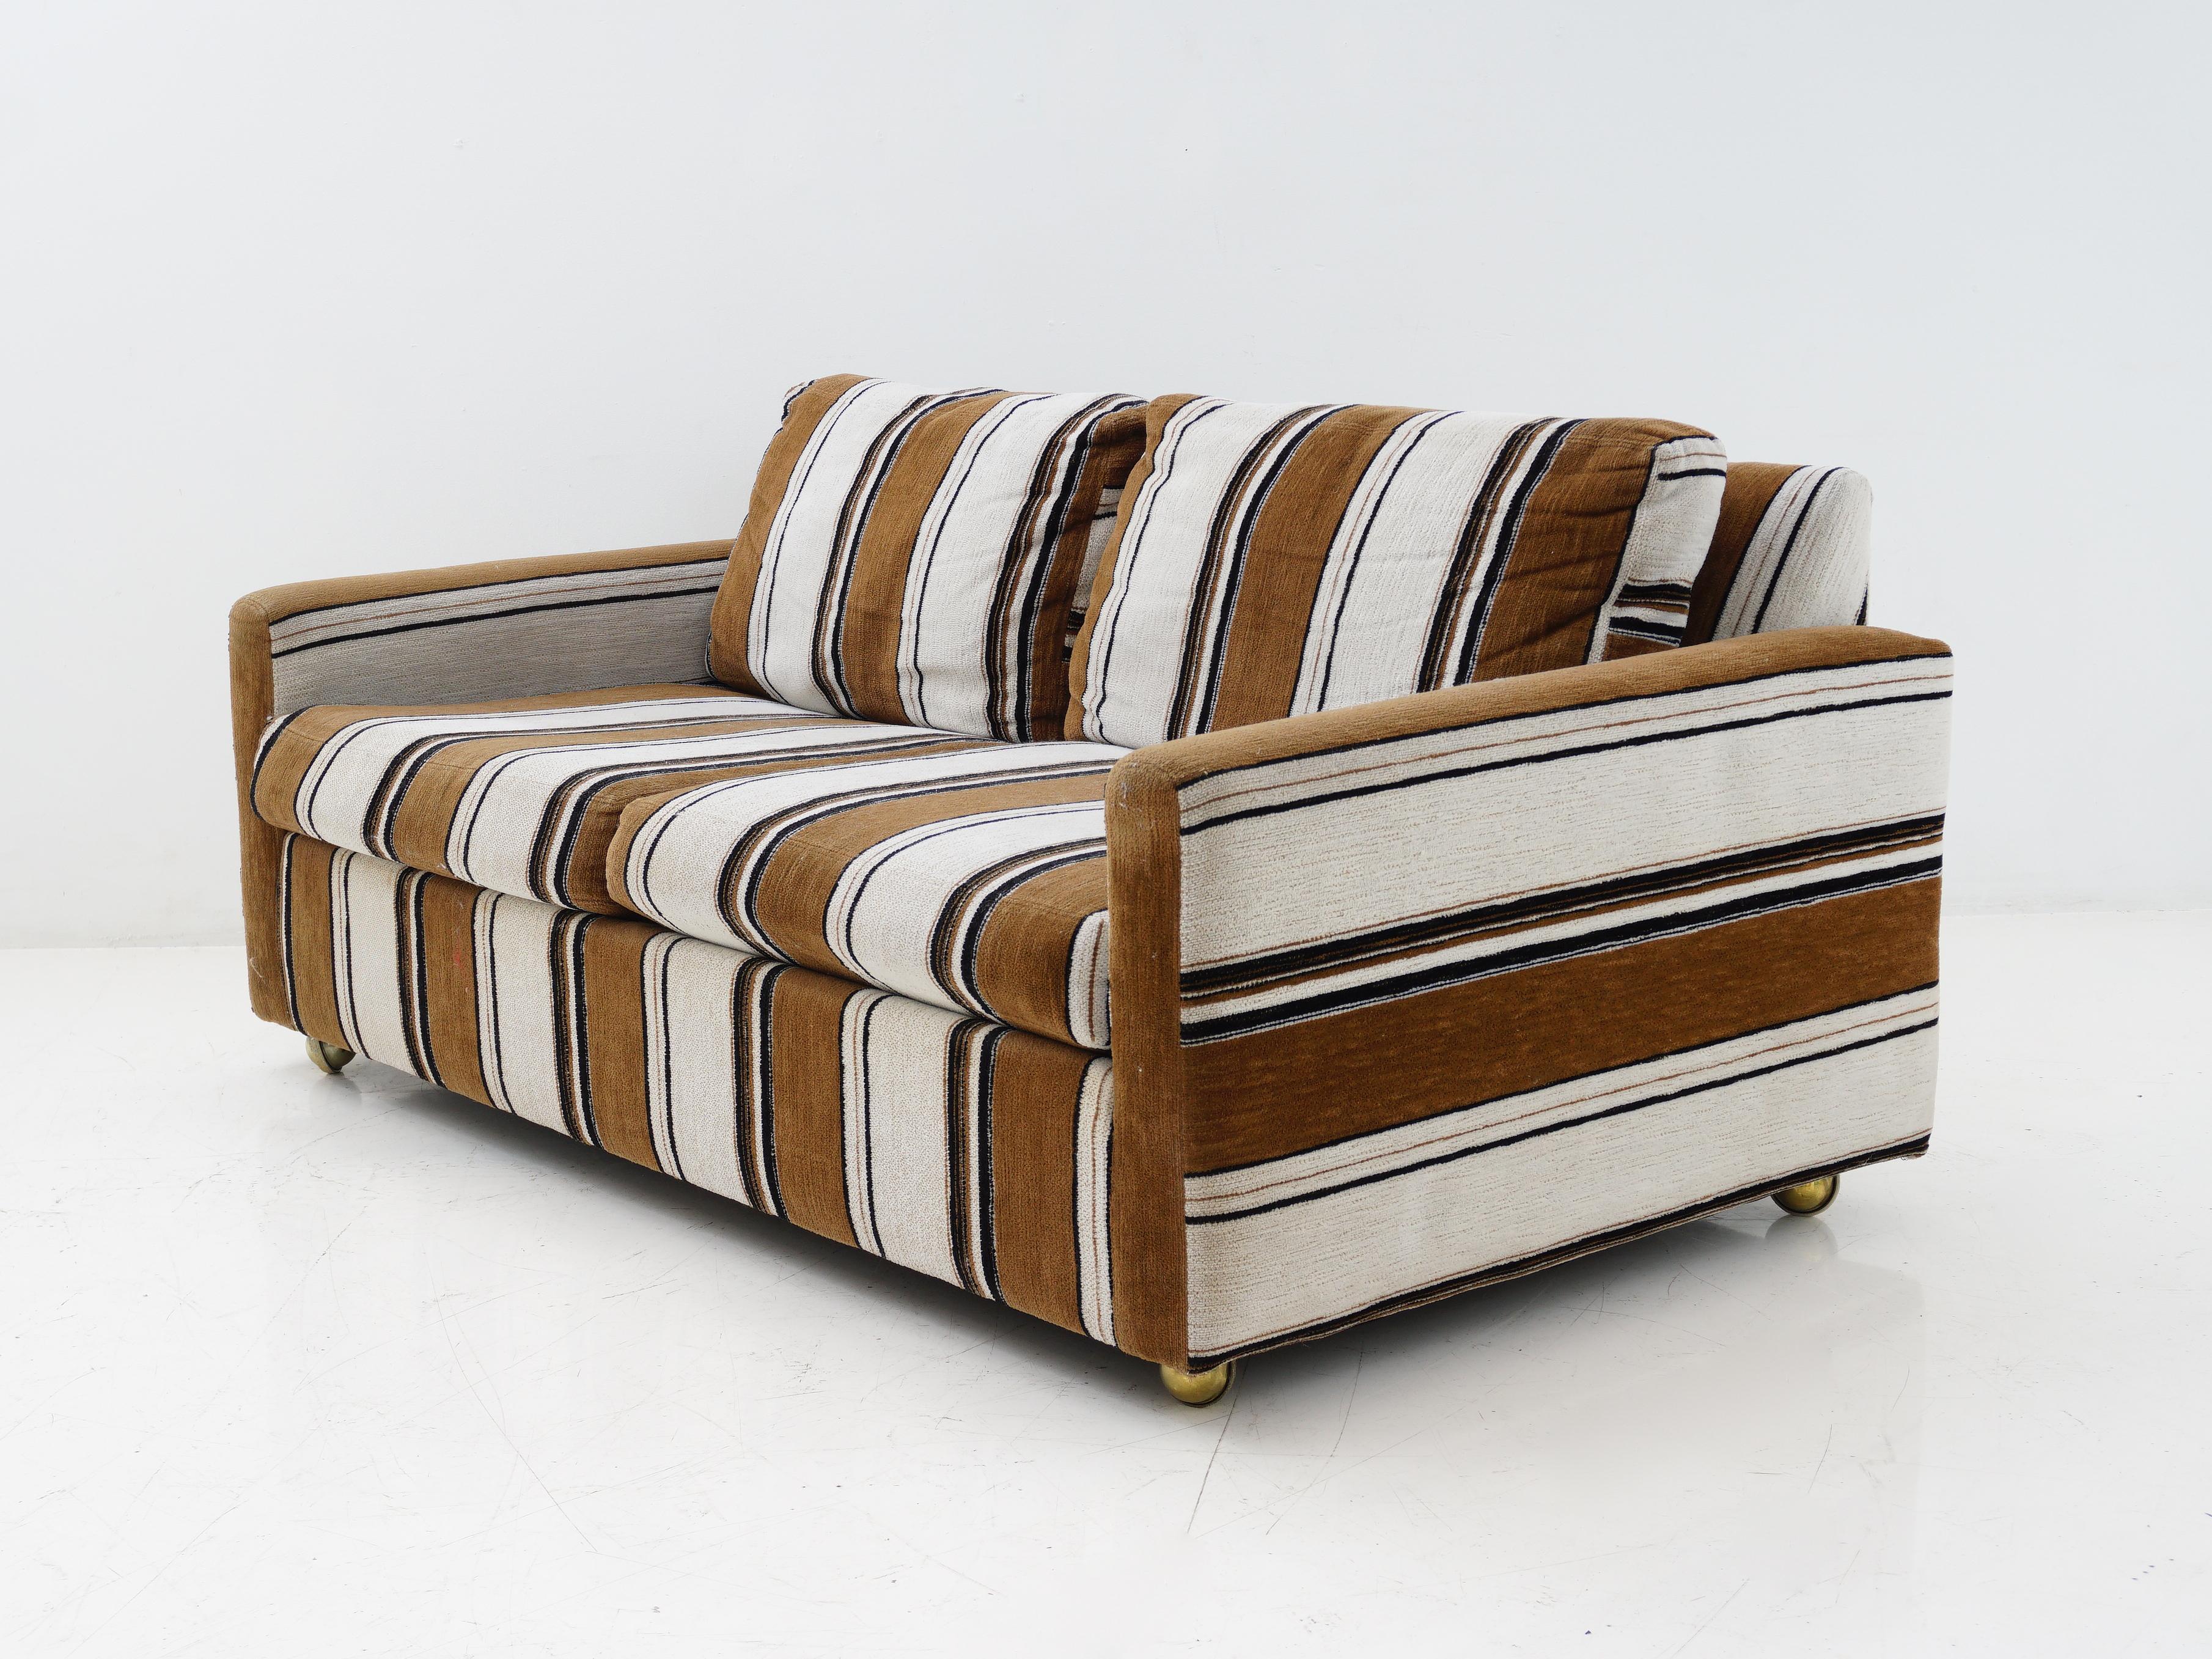 Every stripe tells a story, and these stripes say retro chic. It's basically a warm hug from yesteryear and your ticket to a living room of classic midentury appeal. Sink into the stripes and let this loveseat be the comfiest and swankiest chapter